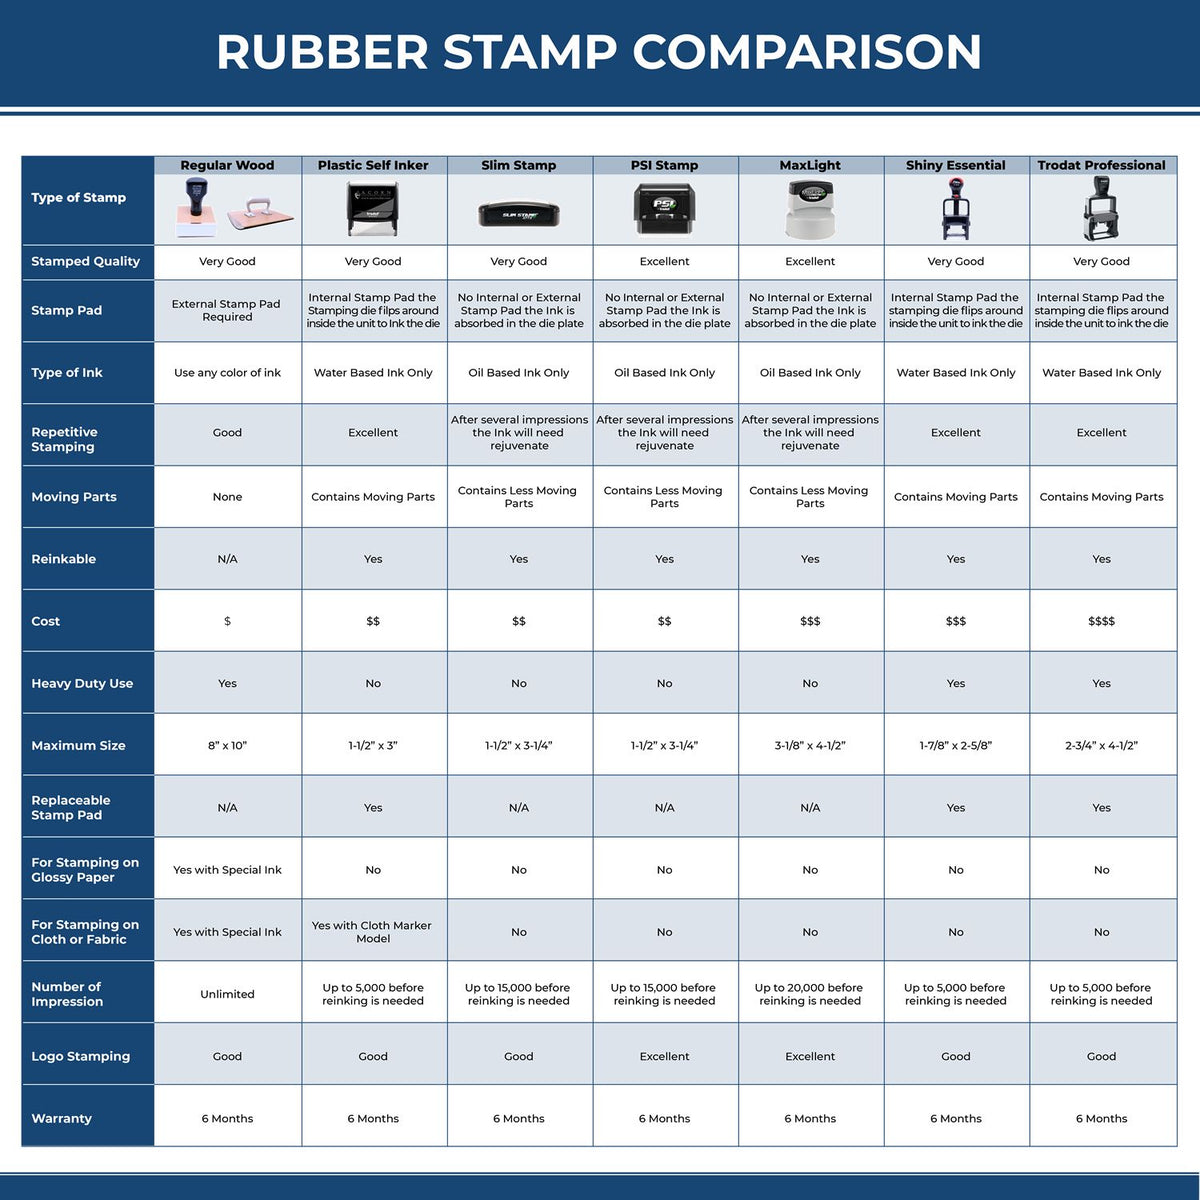 A comparison chart for the different types of mount models available for the Self-Inking New Hampshire Landscape Architect Stamp.